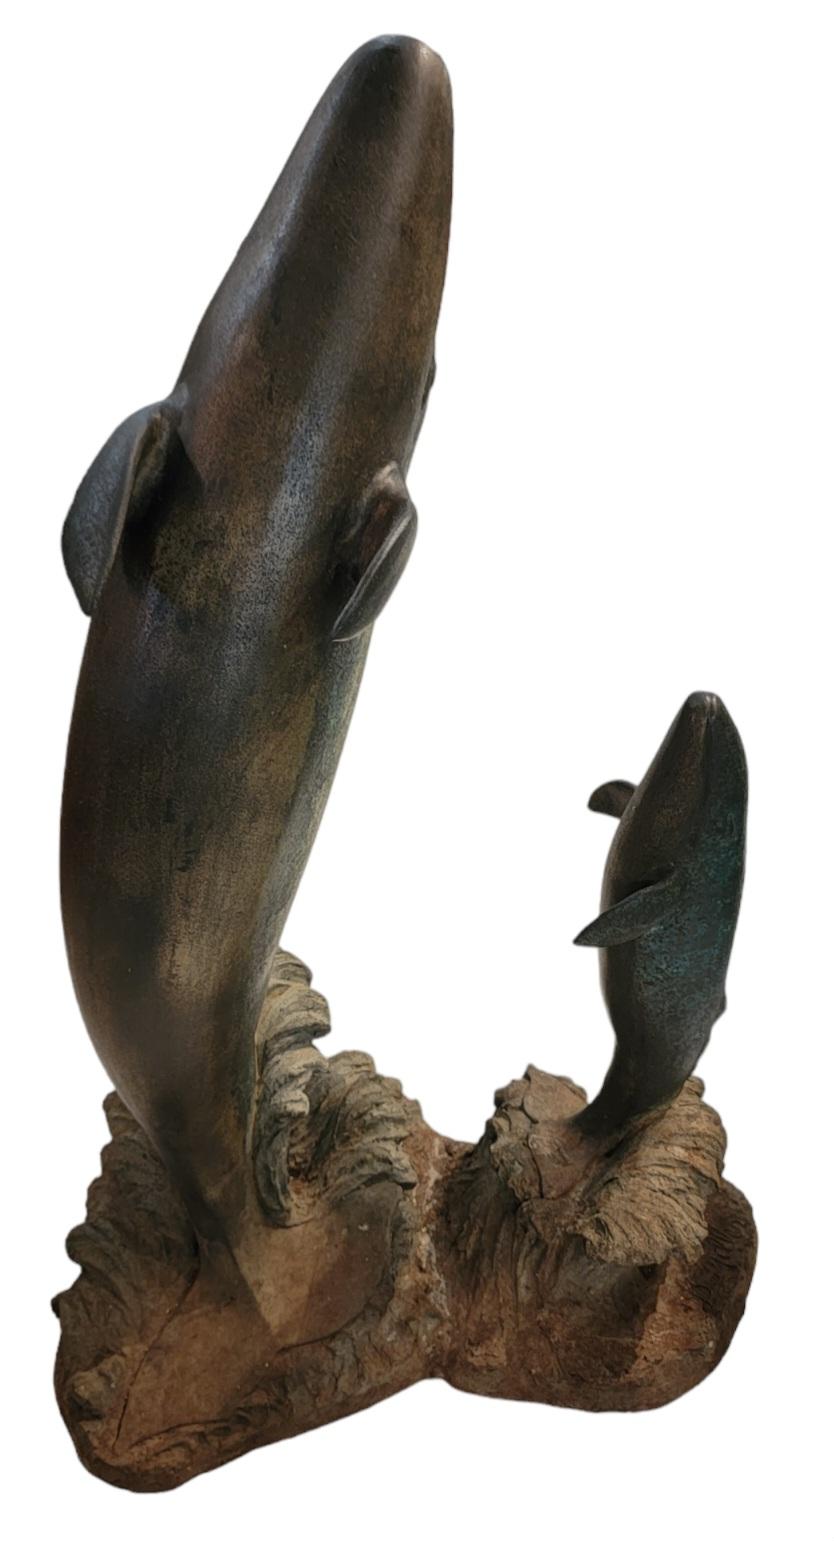 Signed Bronze Double Whale Statue Sculpture. Each whale is breaching and is showing a dance between parent and child. A beautiful dance of life. Measures approx - 30h x 15d x 21w

Signature is at base of sculpture.
